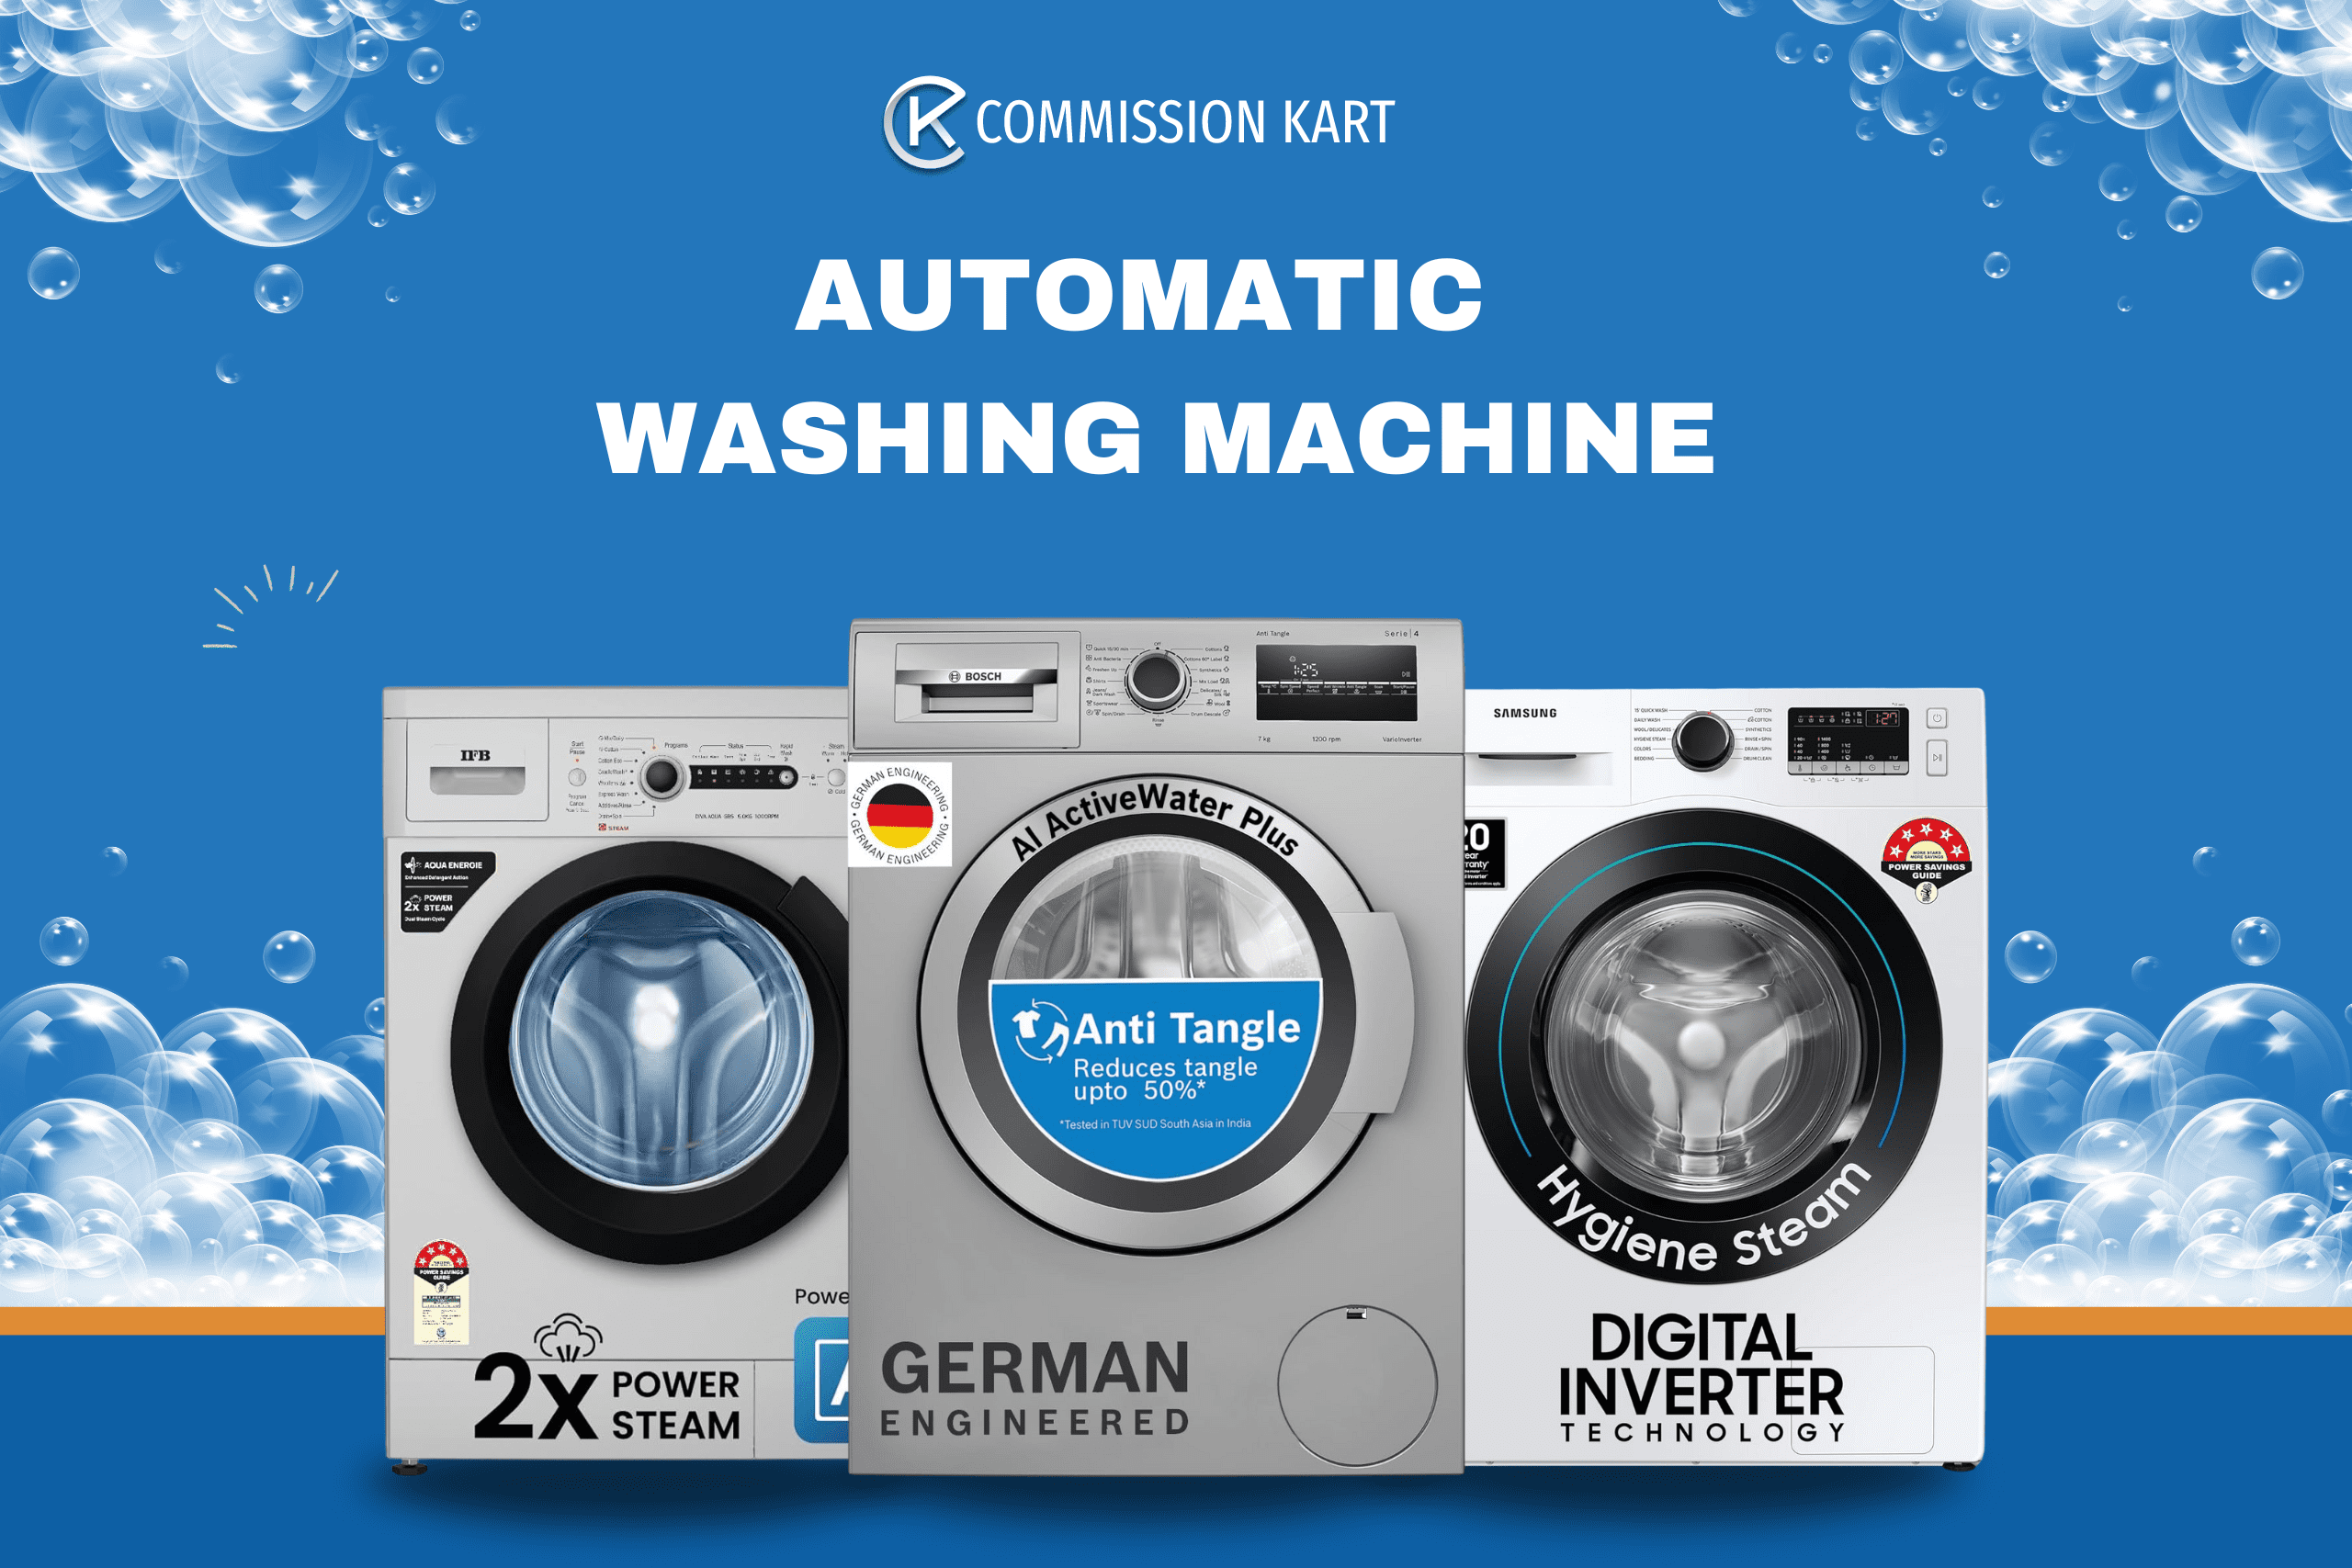 Simplify Your Laundry Routine: Tips for Getting the Most Out of Your Fully Automatic Washing Machine